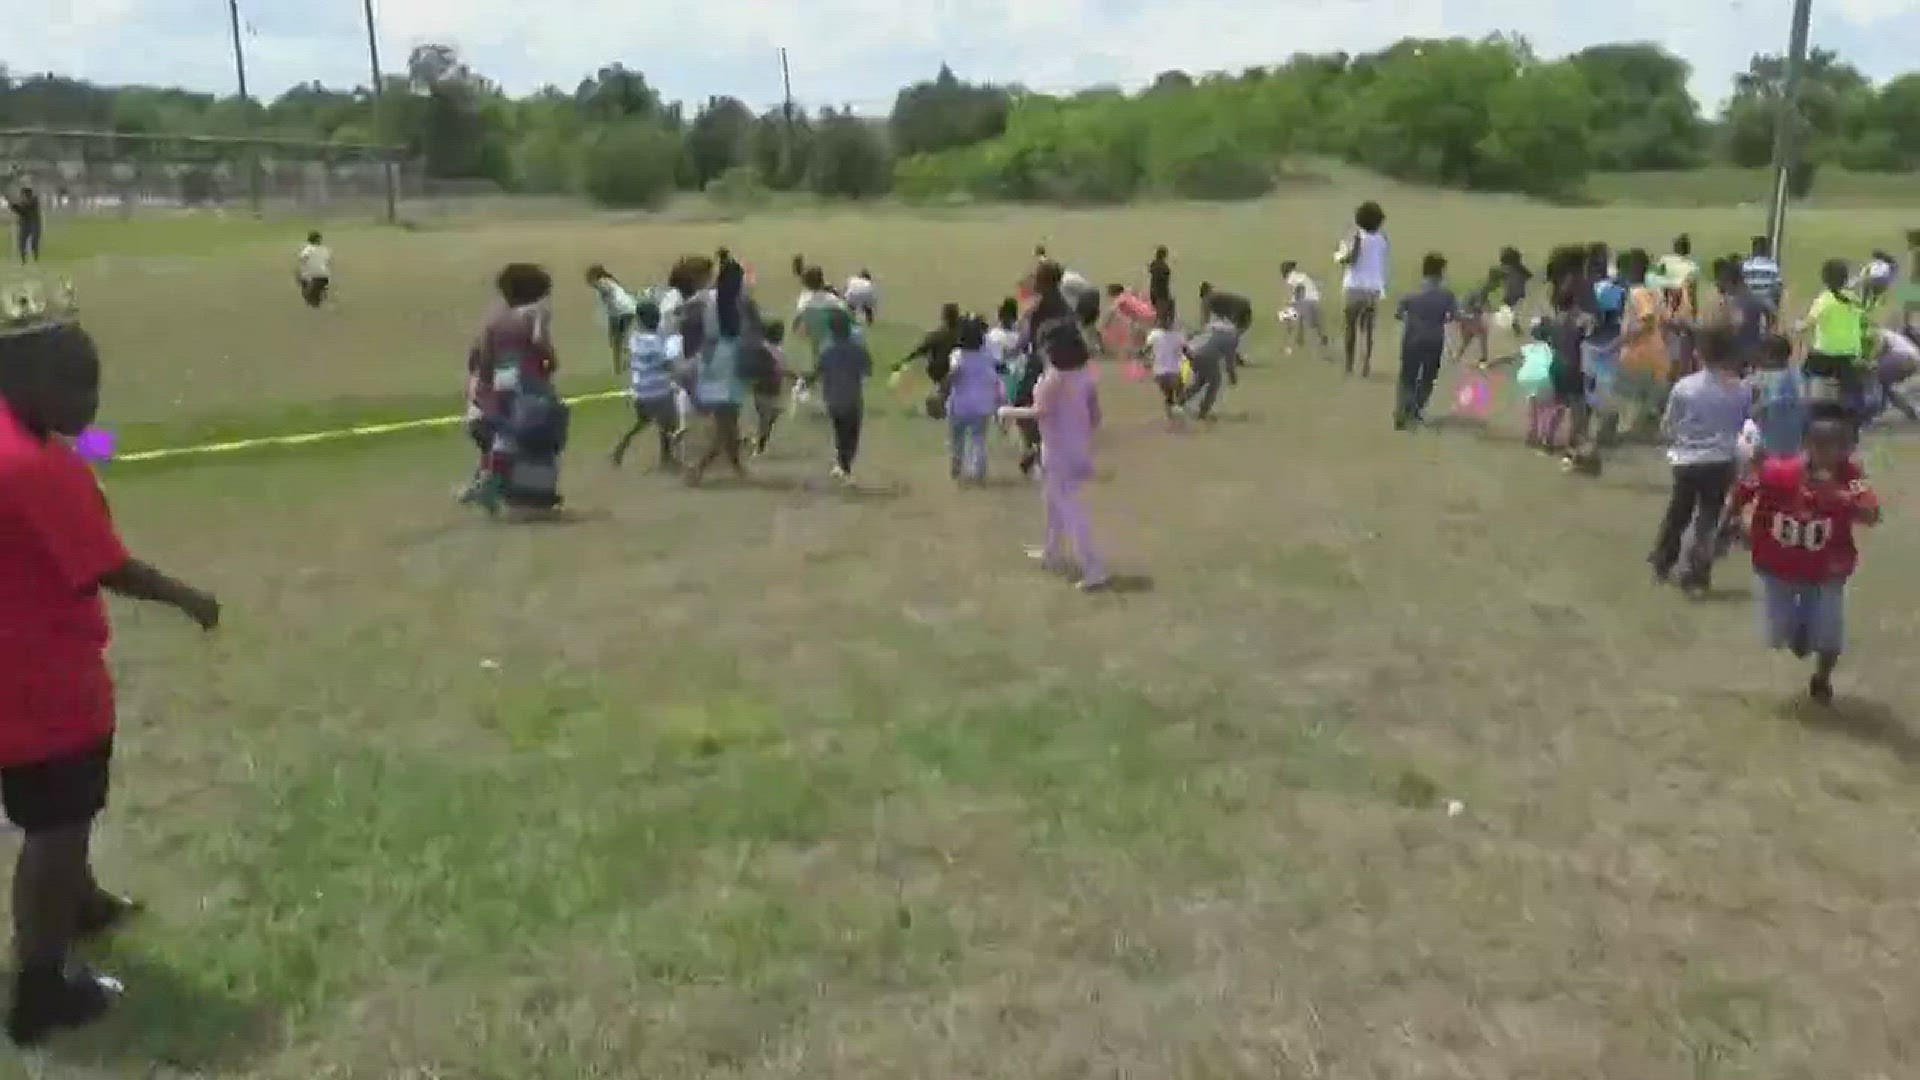 Thousands of kids took part in the Easter egg hunt sponsored by the Lighthouse Church of Houston on Saturday.